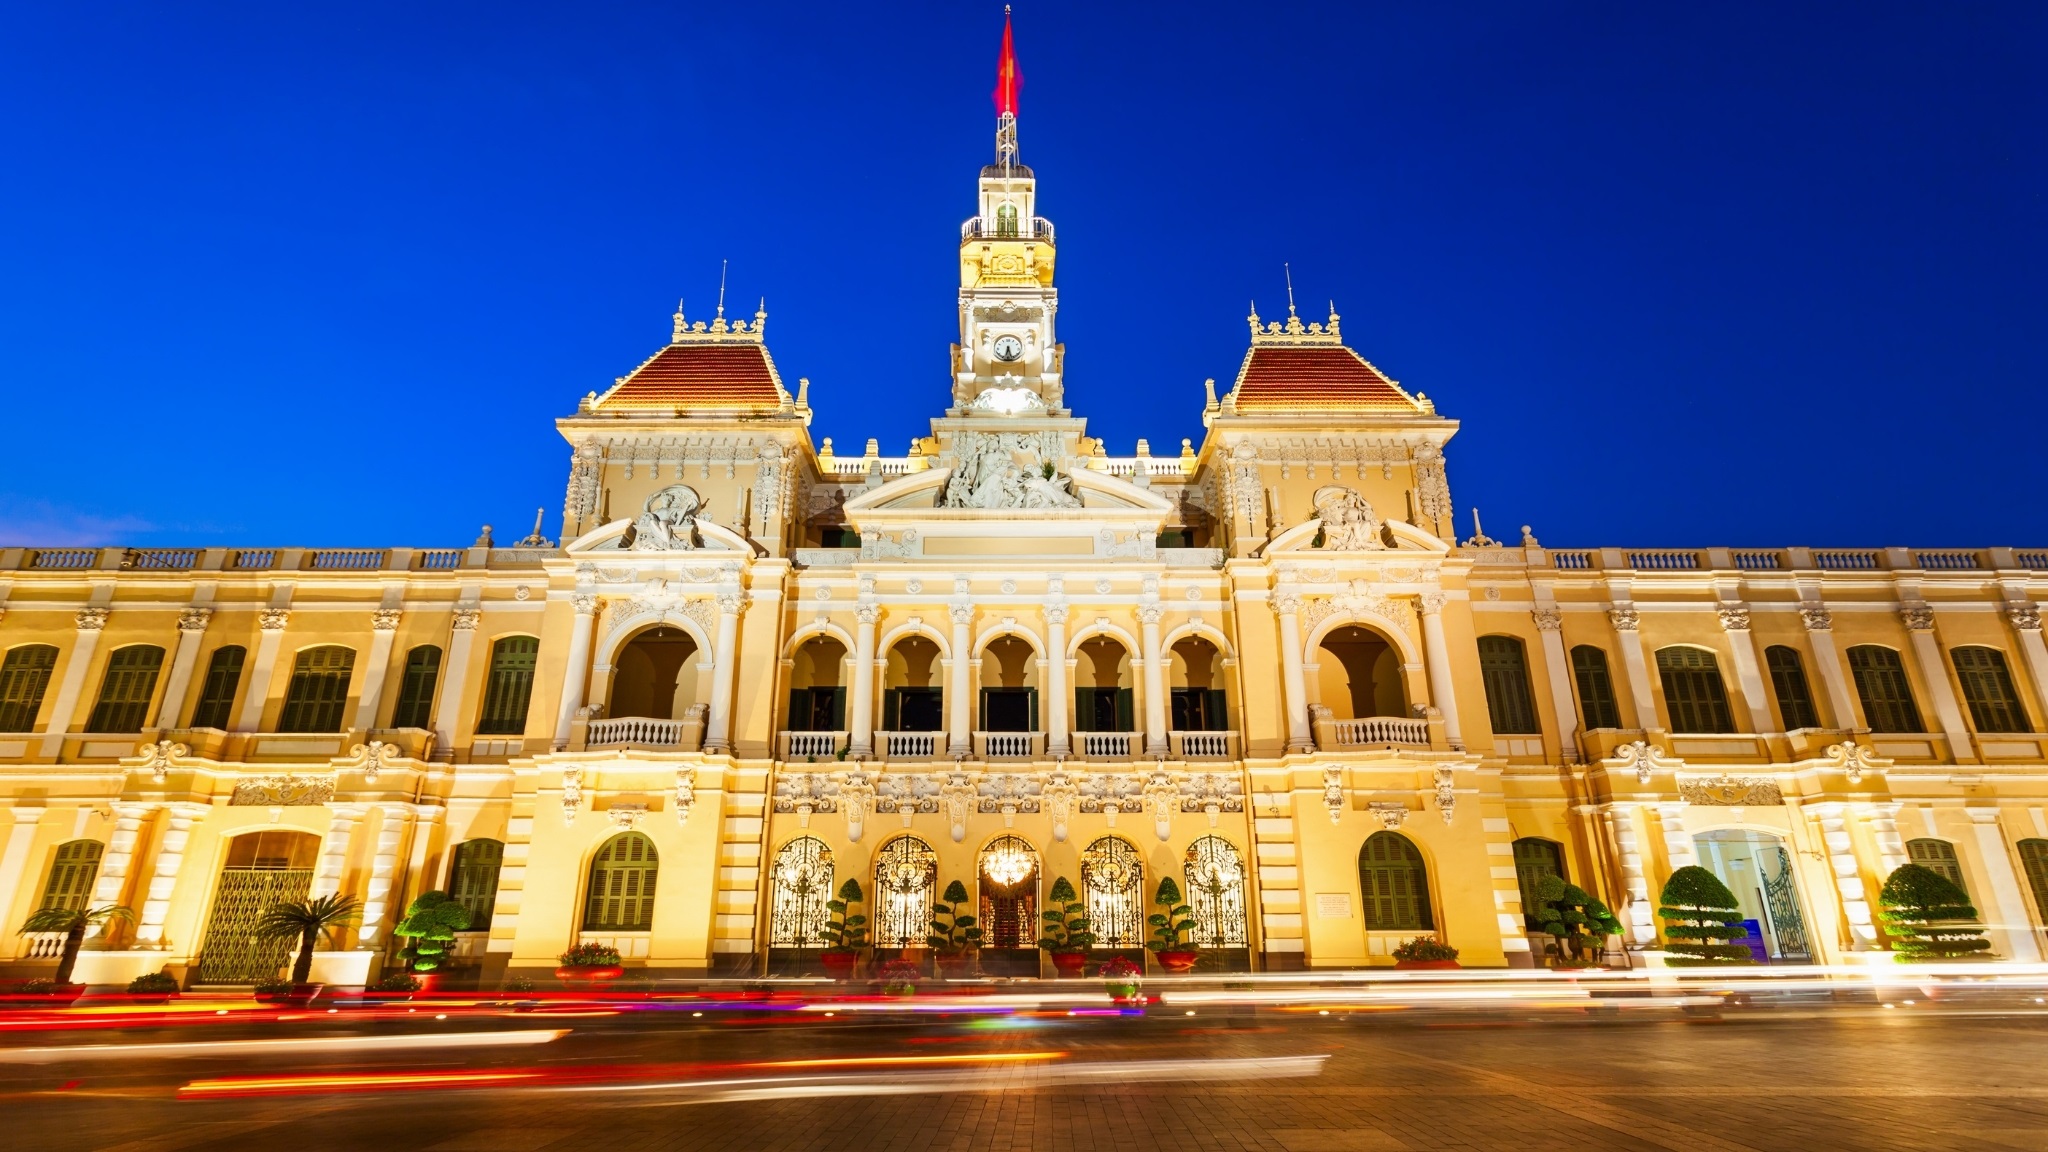 Day 4 Ho Chi Minh City, An Energetic Destination, Boasts A Variety Of Cultural And Historical Attractions